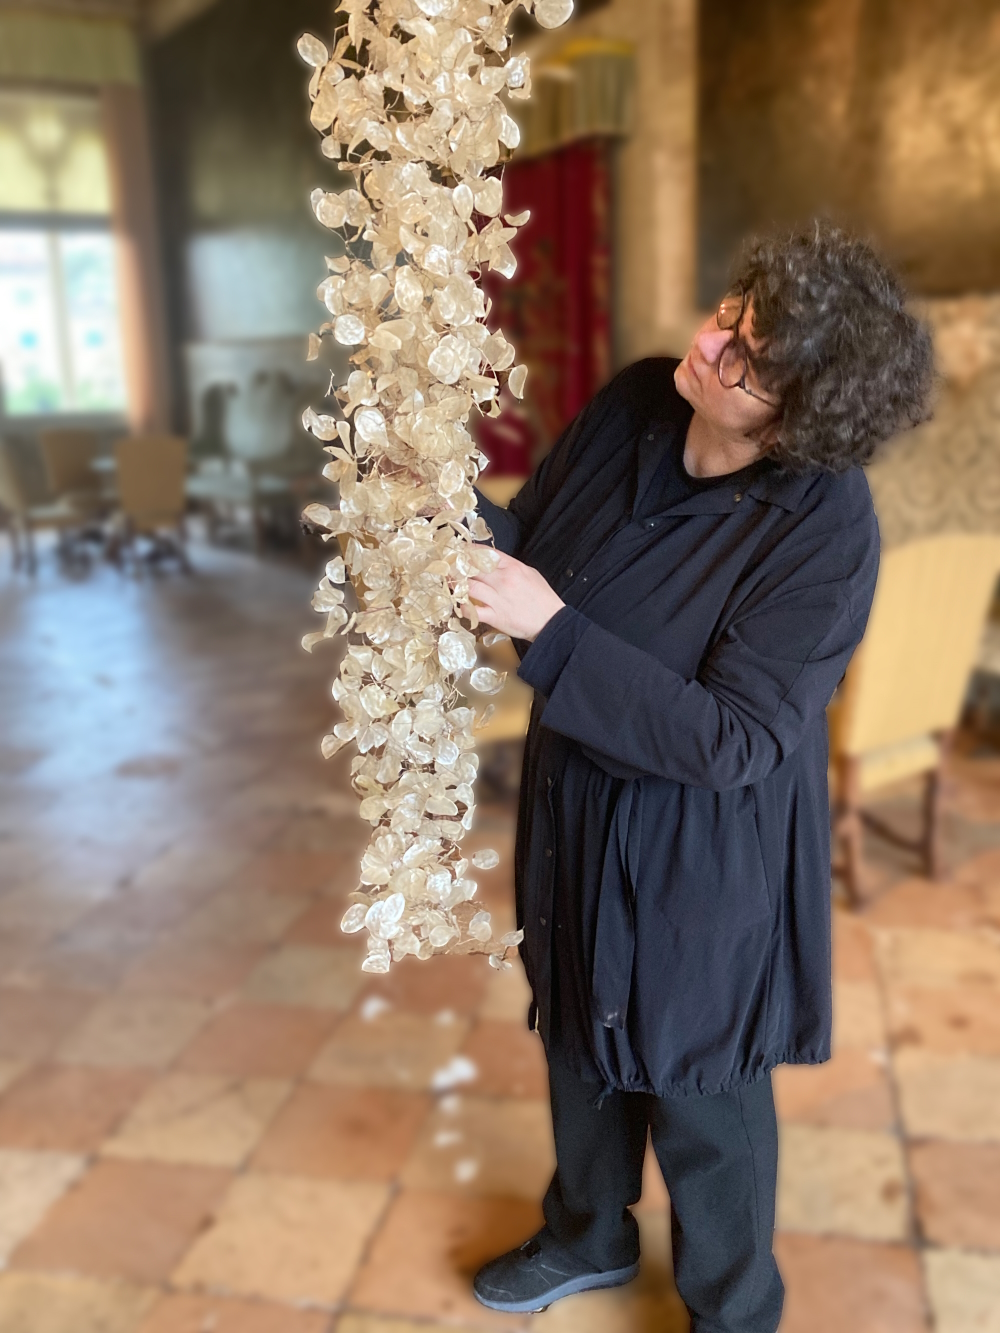 Anja Maria Strauss working on 'Lunaria', a room object at the 'Arte Laguna Prize', the international art competition open to multiple disciplines for the enhancement of contemporary art, in Venice/Italy.